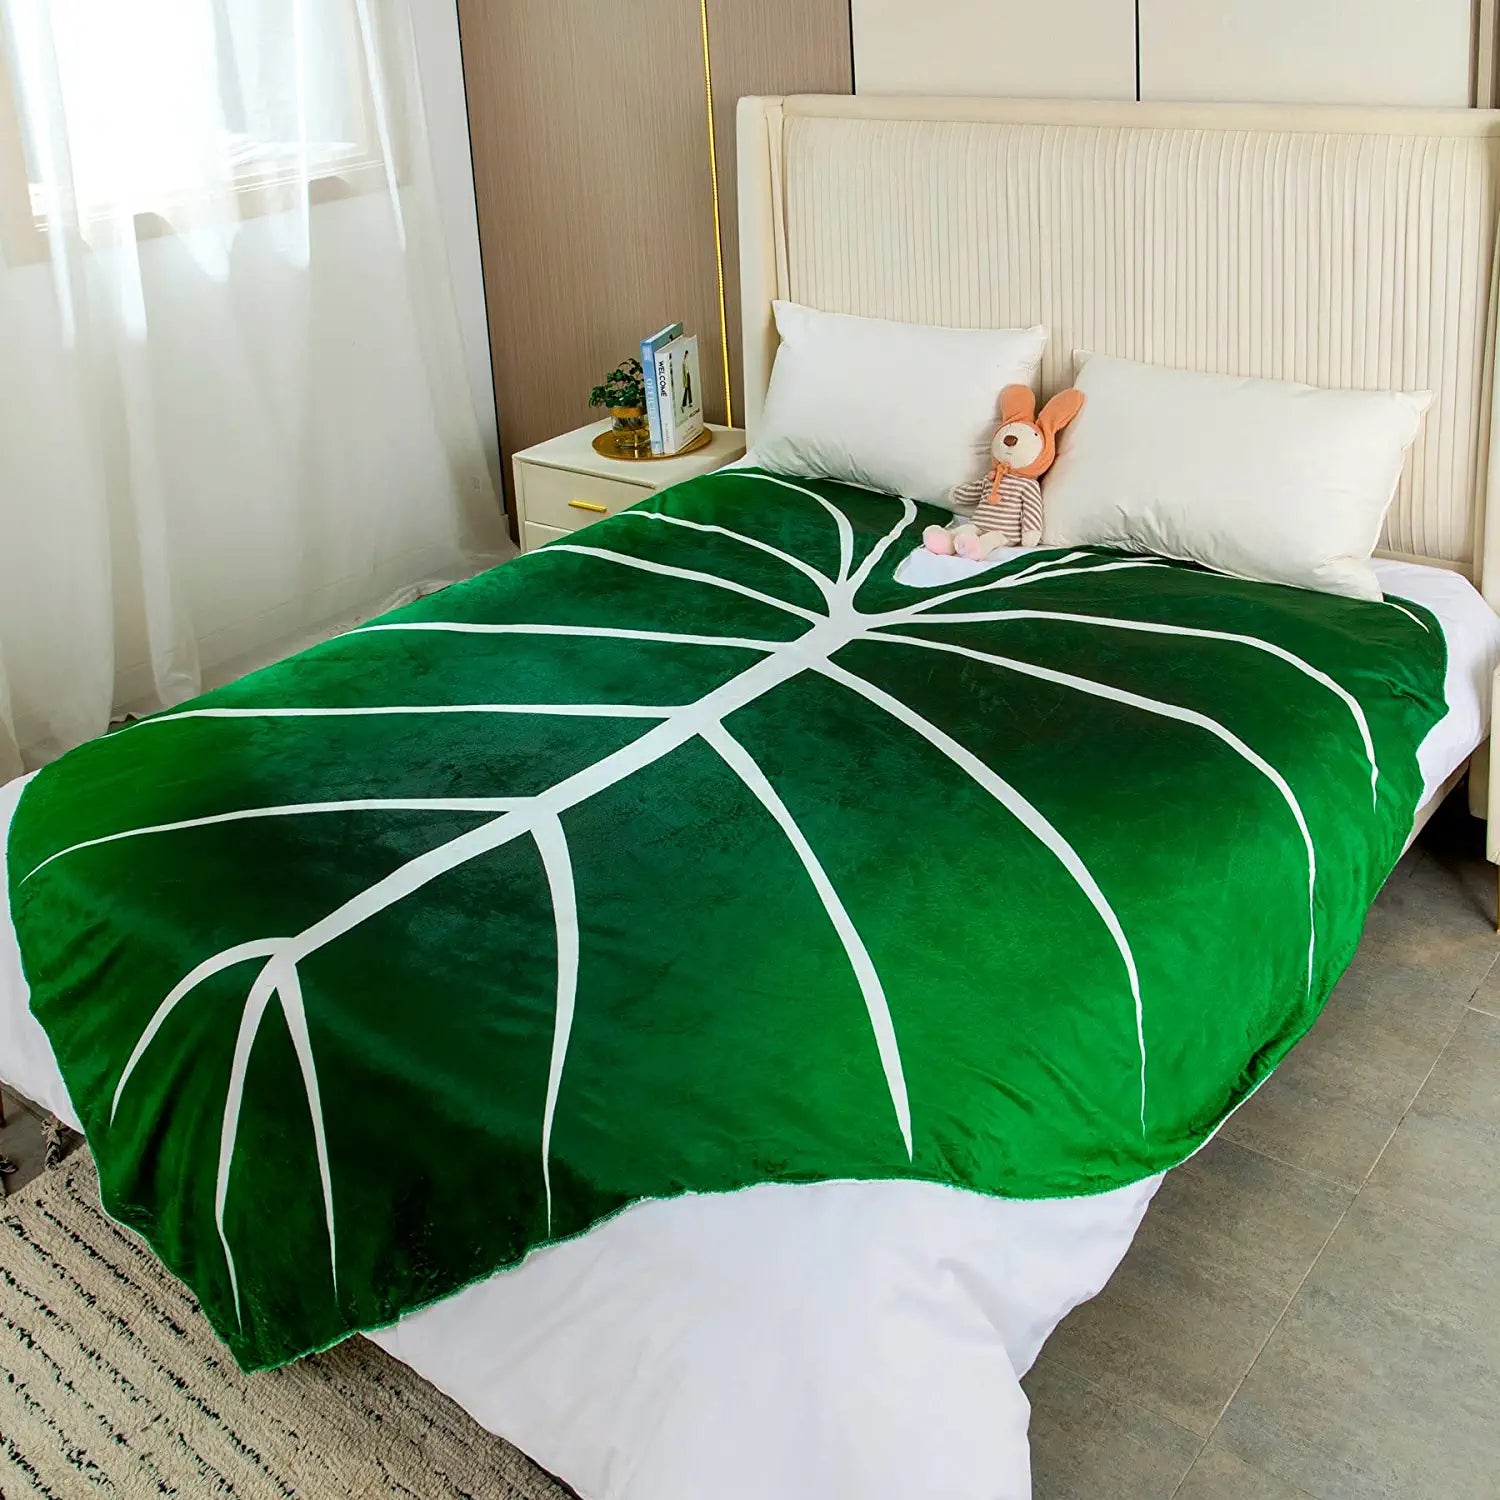 An oversized giant green blanket with white veins resting on a bed.